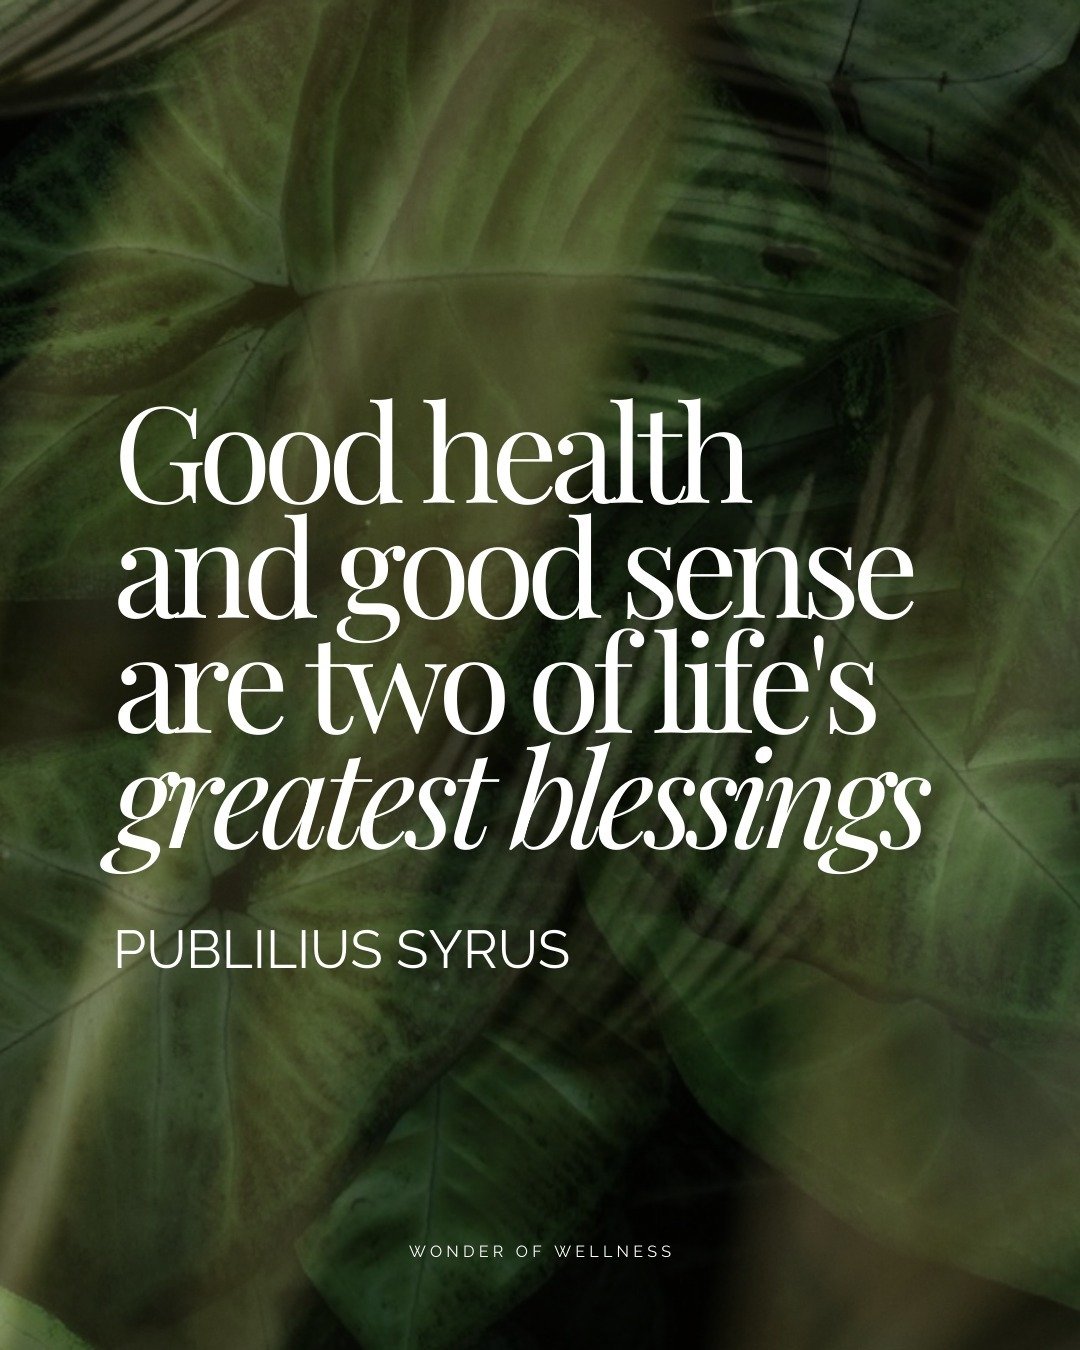 Cheers to life's greatest blessings: good health and good sense! 🌿

We saw this quote on a card and absolutely loved it. We couldn't agree more. 

Let's value these simple joys and being open enough to receive what life is trying to share with us. F